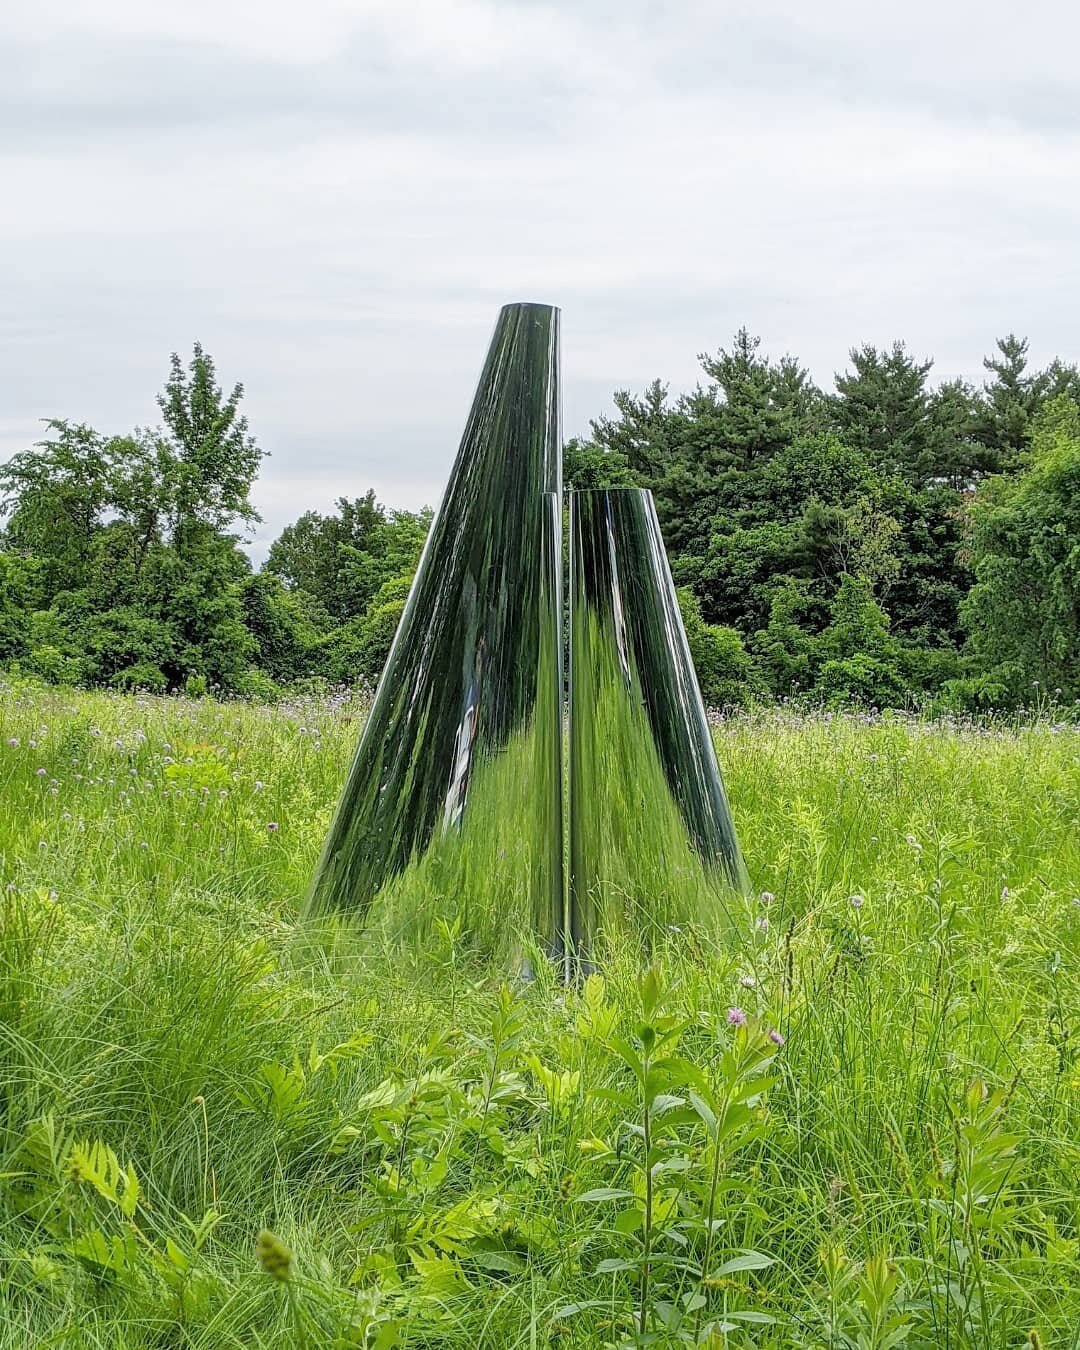 Double install yesterday in Bennington and North Bennington, VT. One new piece one old piece.
.
Whispering Secrets 
Aluminum 
H8' W6' D4'
2021
Installed in the wildflower meadow at the Bennington Museum 
.
Construct 7
Steel
H6 W20&quot; D1'
2016
Inst